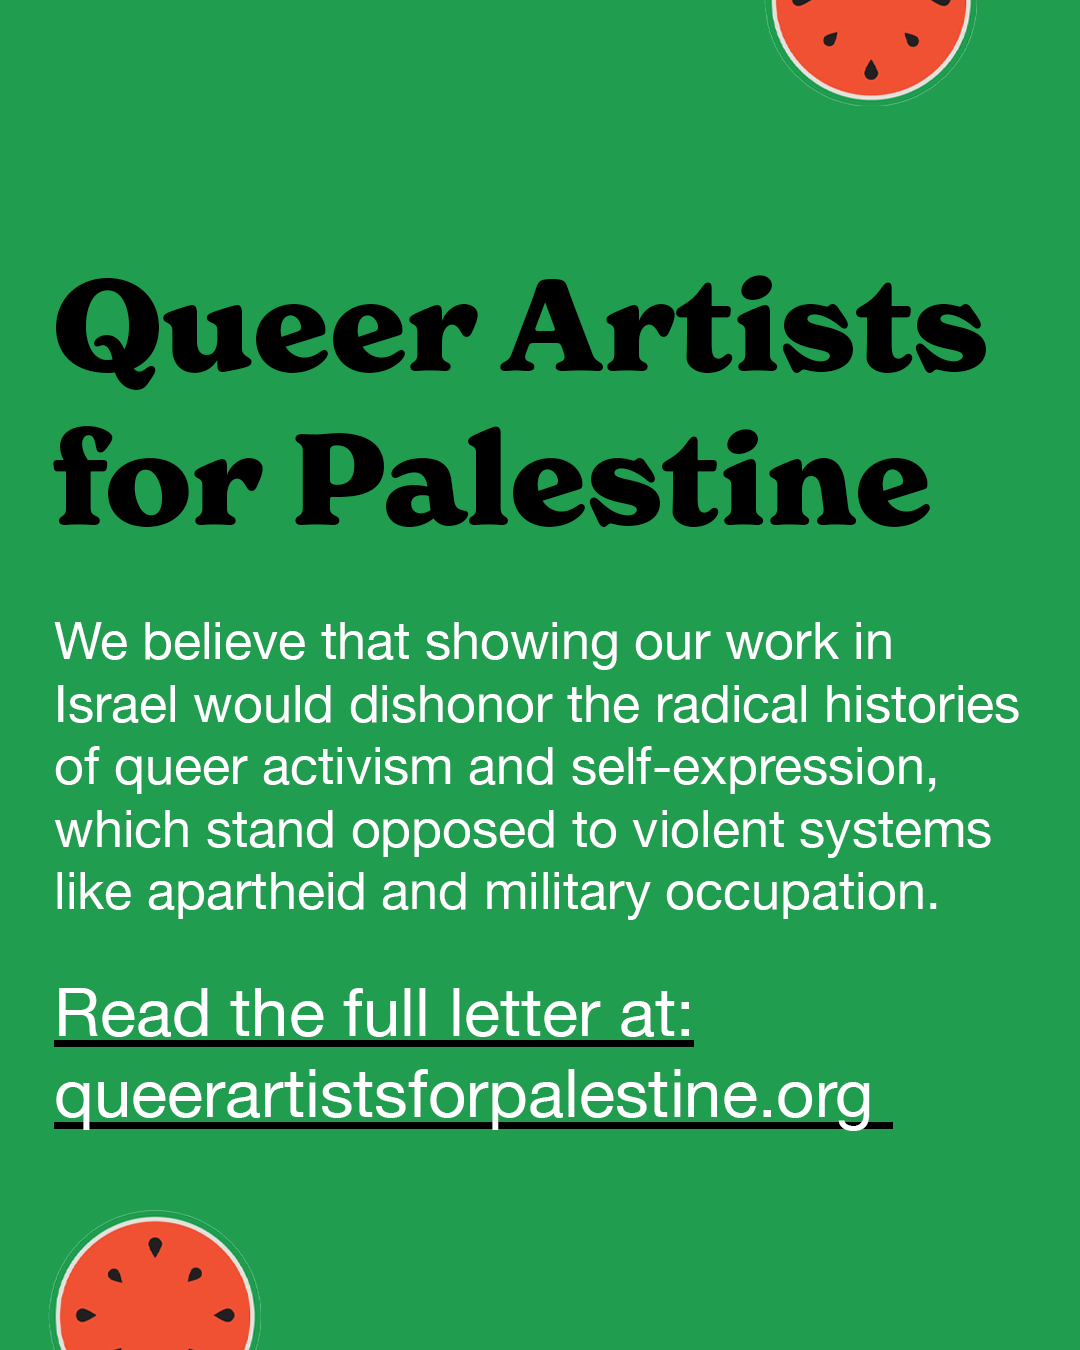 Queer Artists for Palestine - we believe that showing our work in Isreal would dishonor the radical histories of queer activism and self-expression, which stand opposed to violent systems like apartheid and military occupation. 